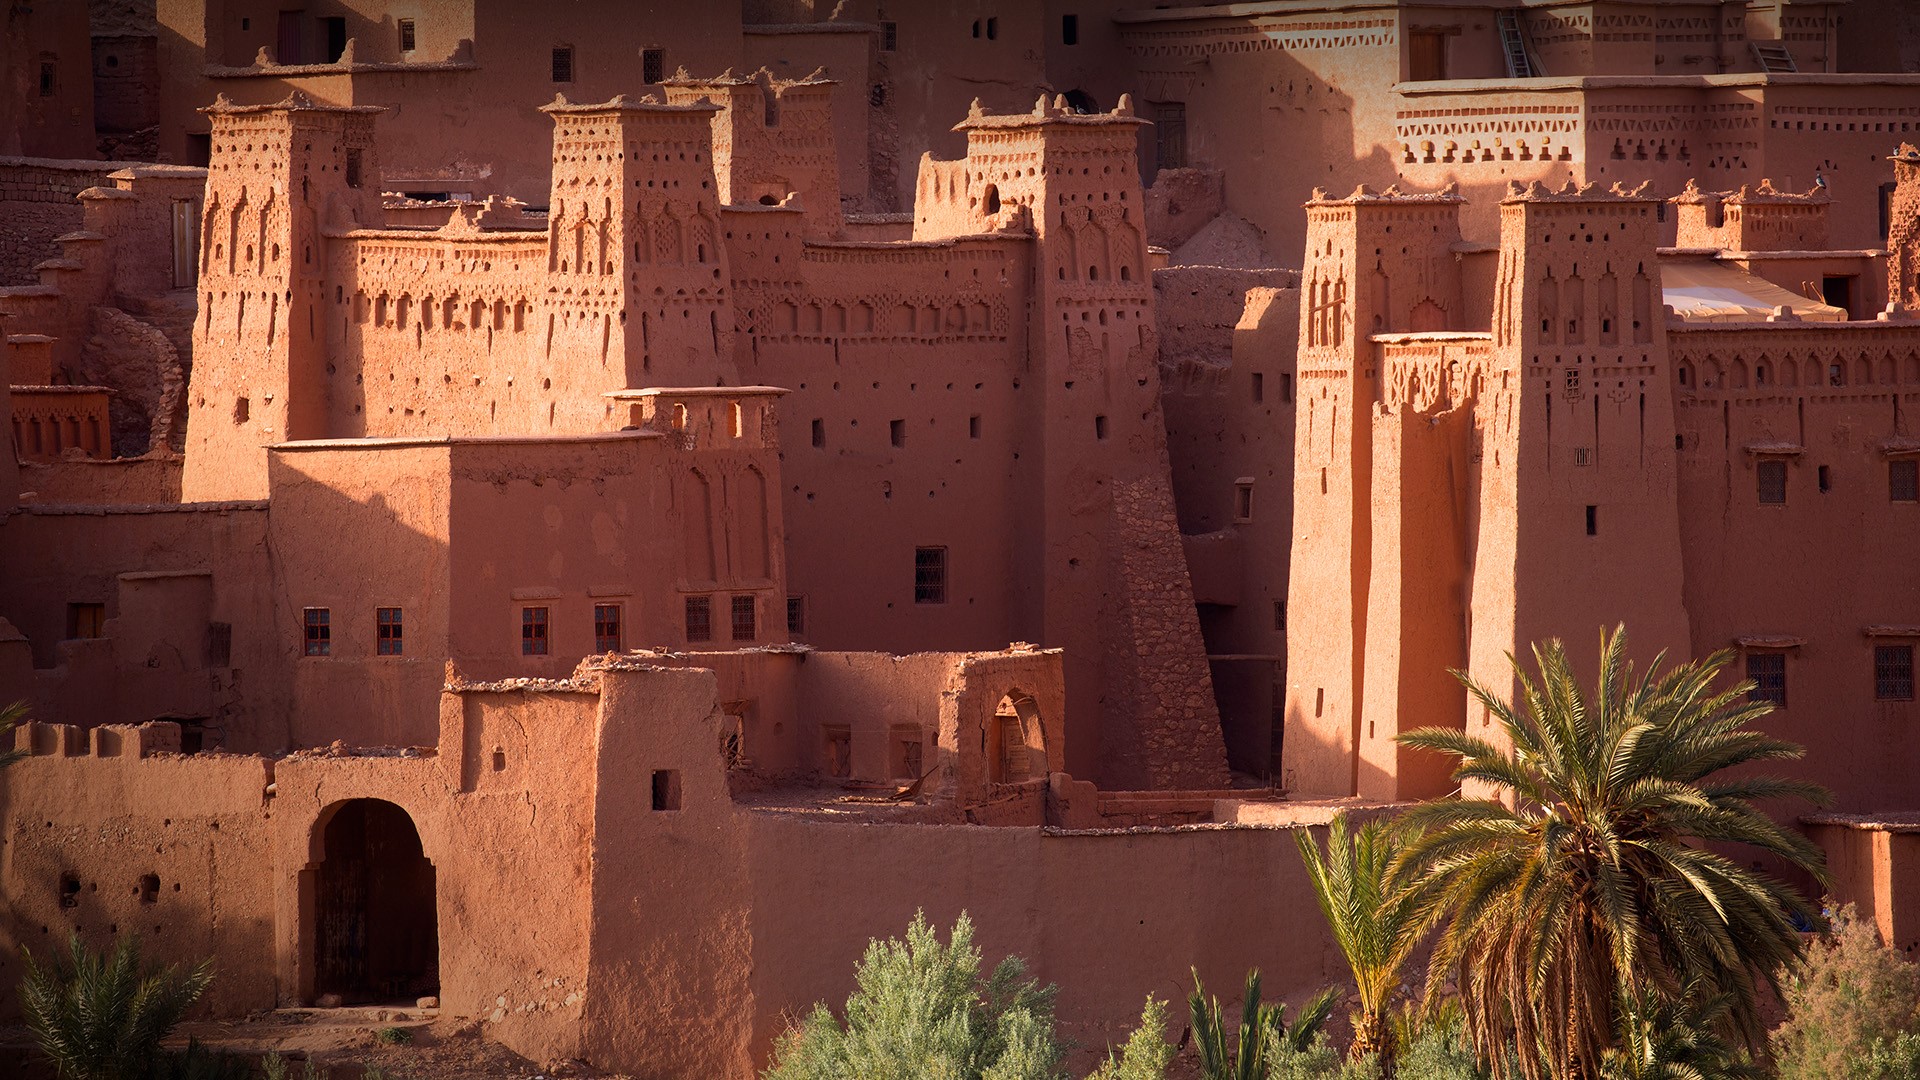 Amar Grover visits Ait Benhaddou in Morocco - The Inside Track